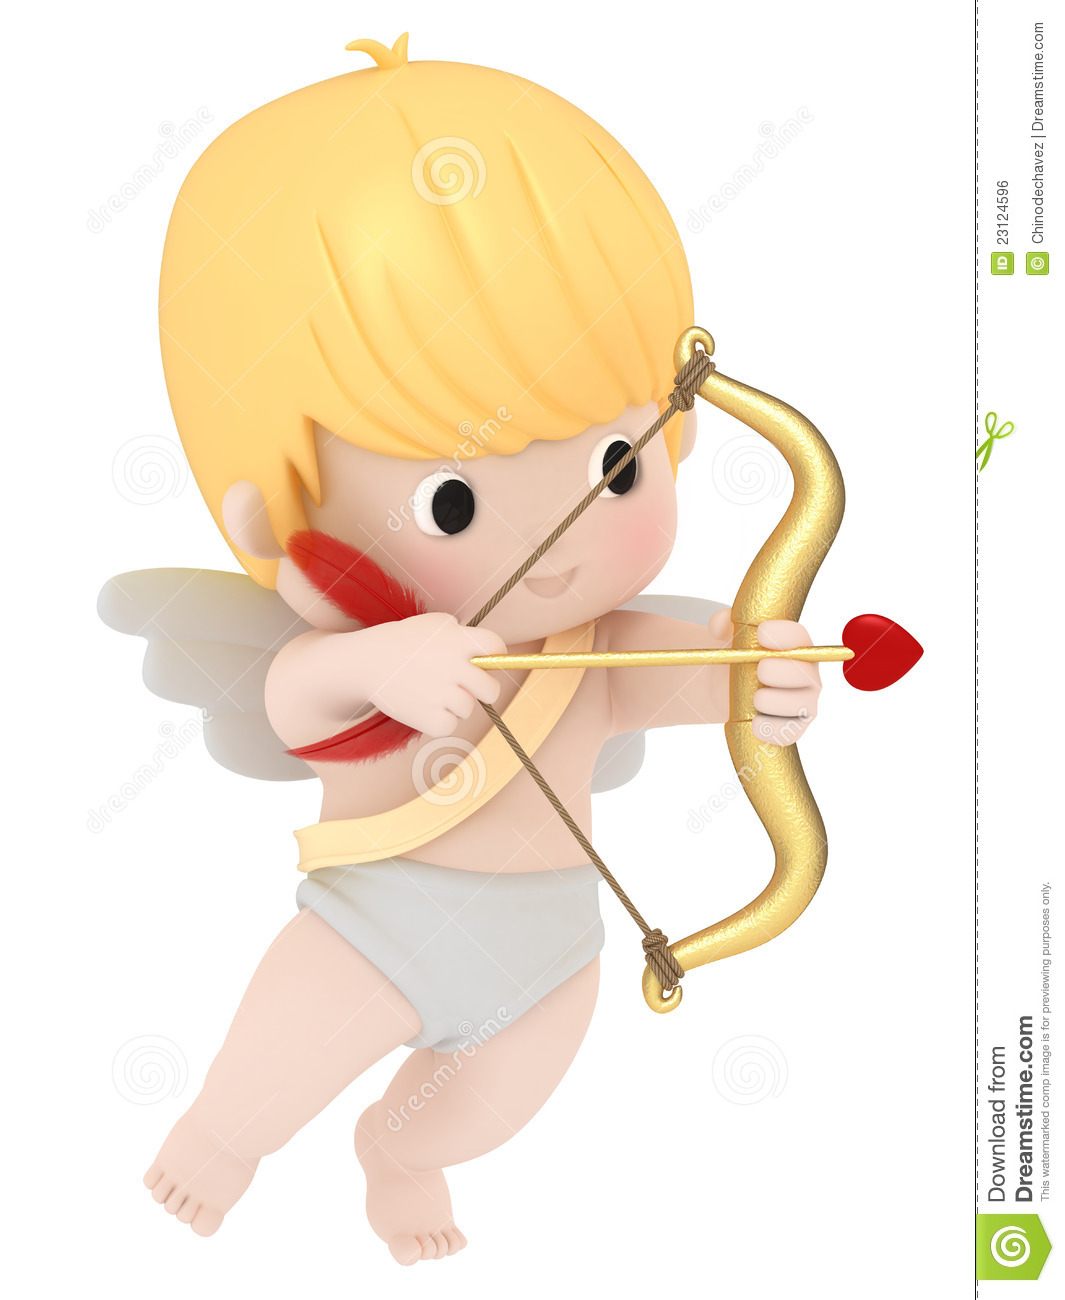 Cupid With Bow And Arrow Royalty Free Stock Image   Image  23124596